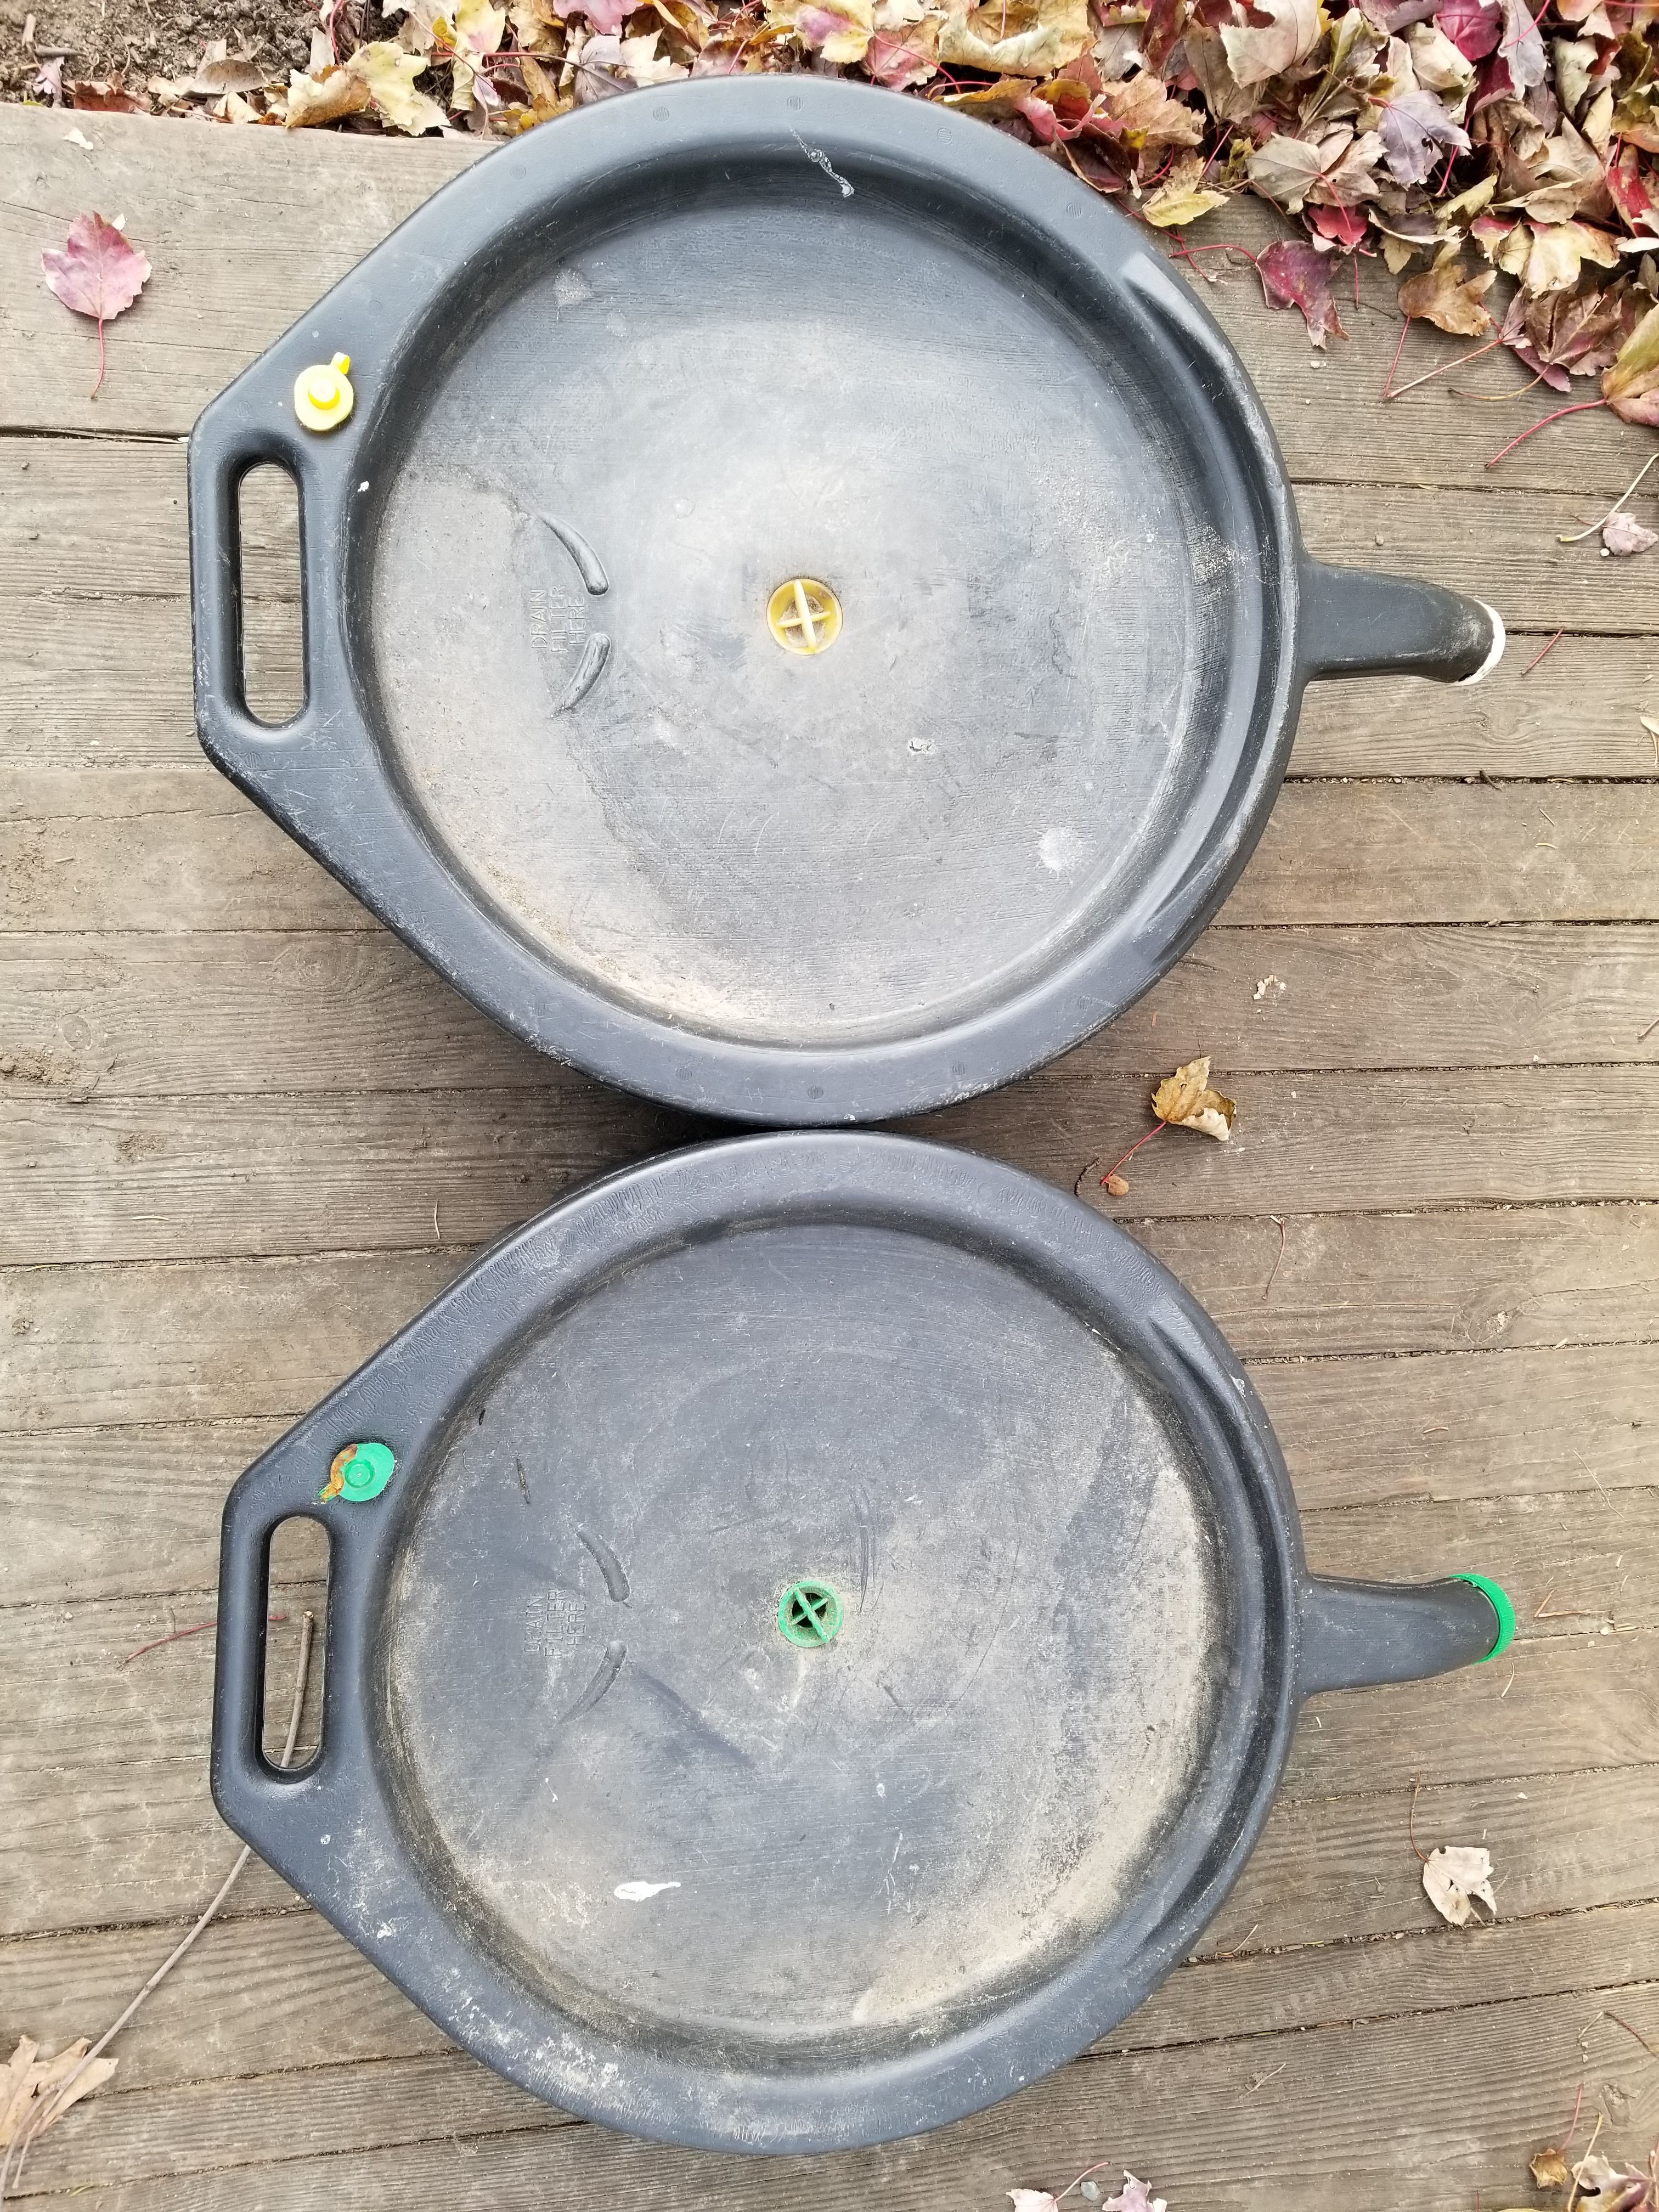 Used motor oil collection containers with spout.